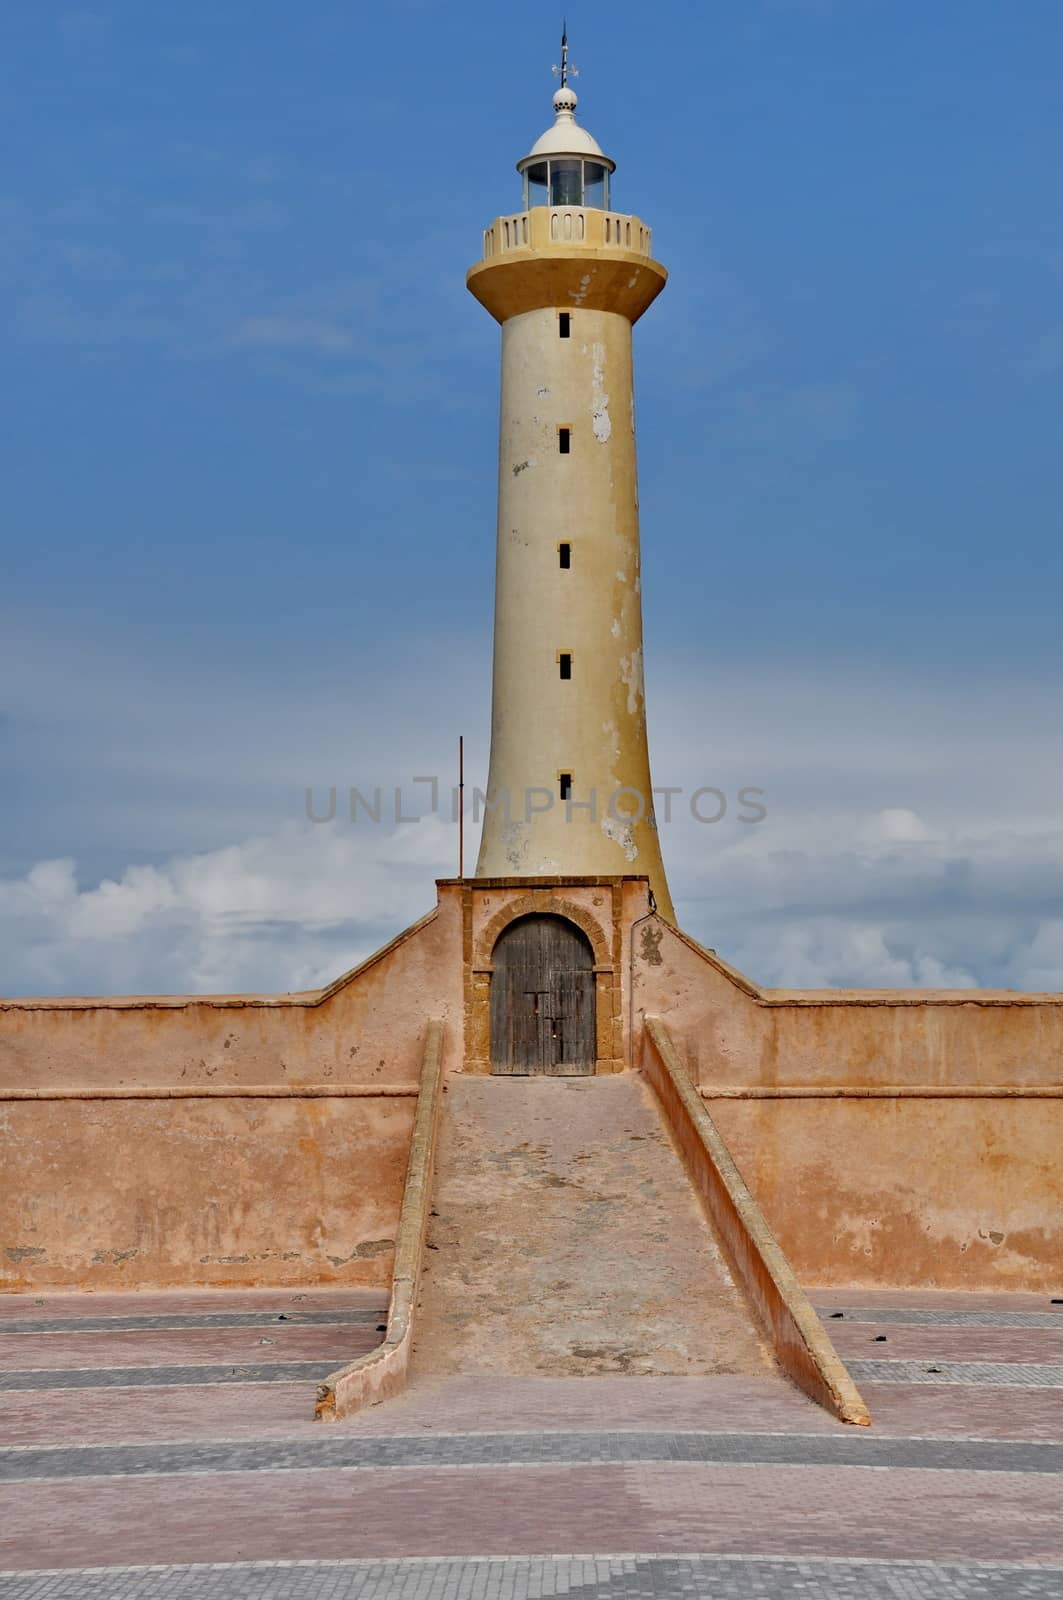 Lighthouse of Rabat, Morocco by anderm